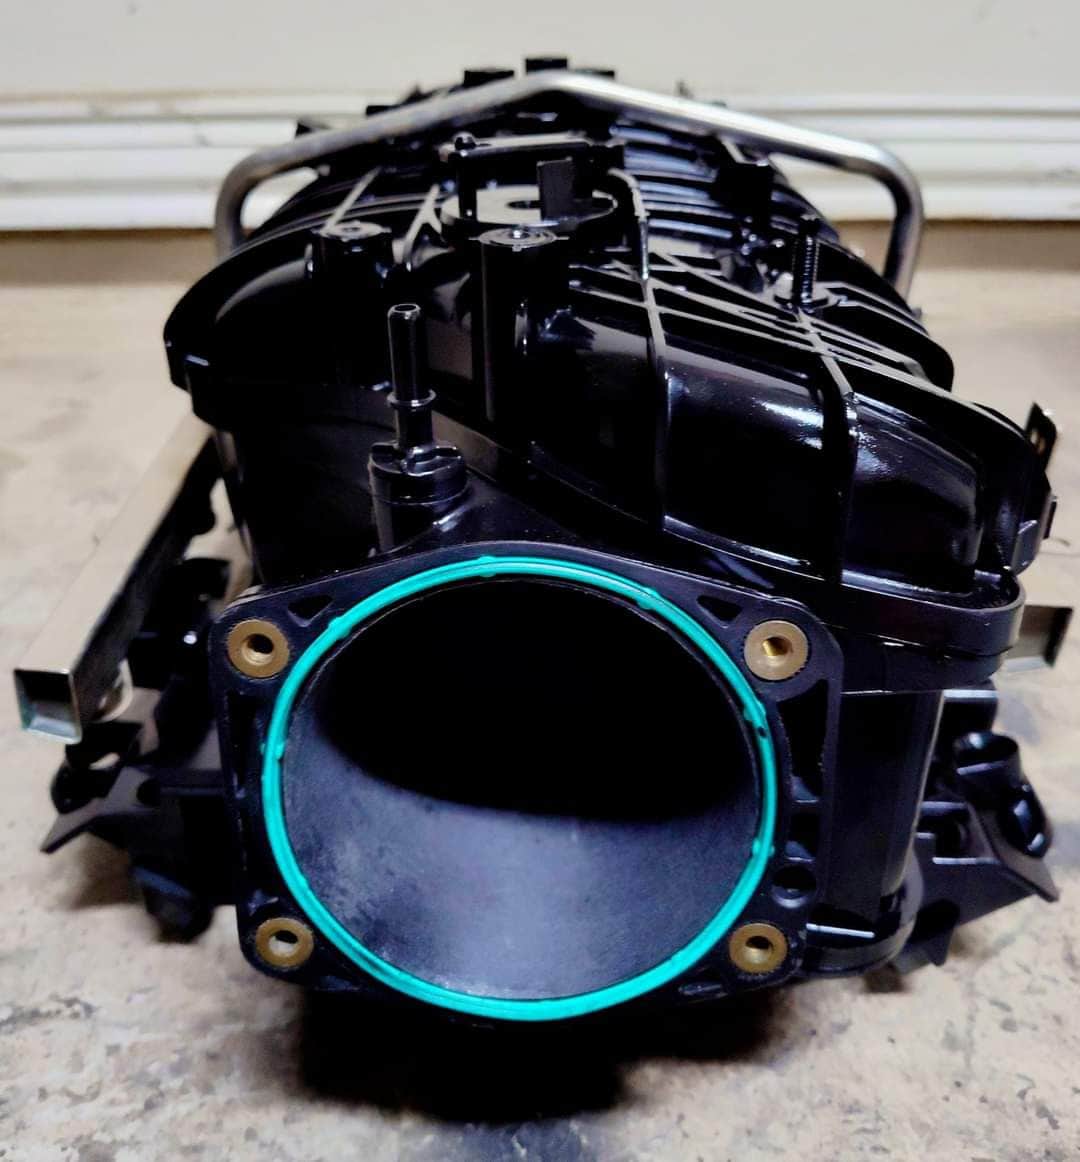 Engine - Intake/Fuel - Rob d ls garage sale - Used - All Years  All Models - Weslaco, TX 78596, United States